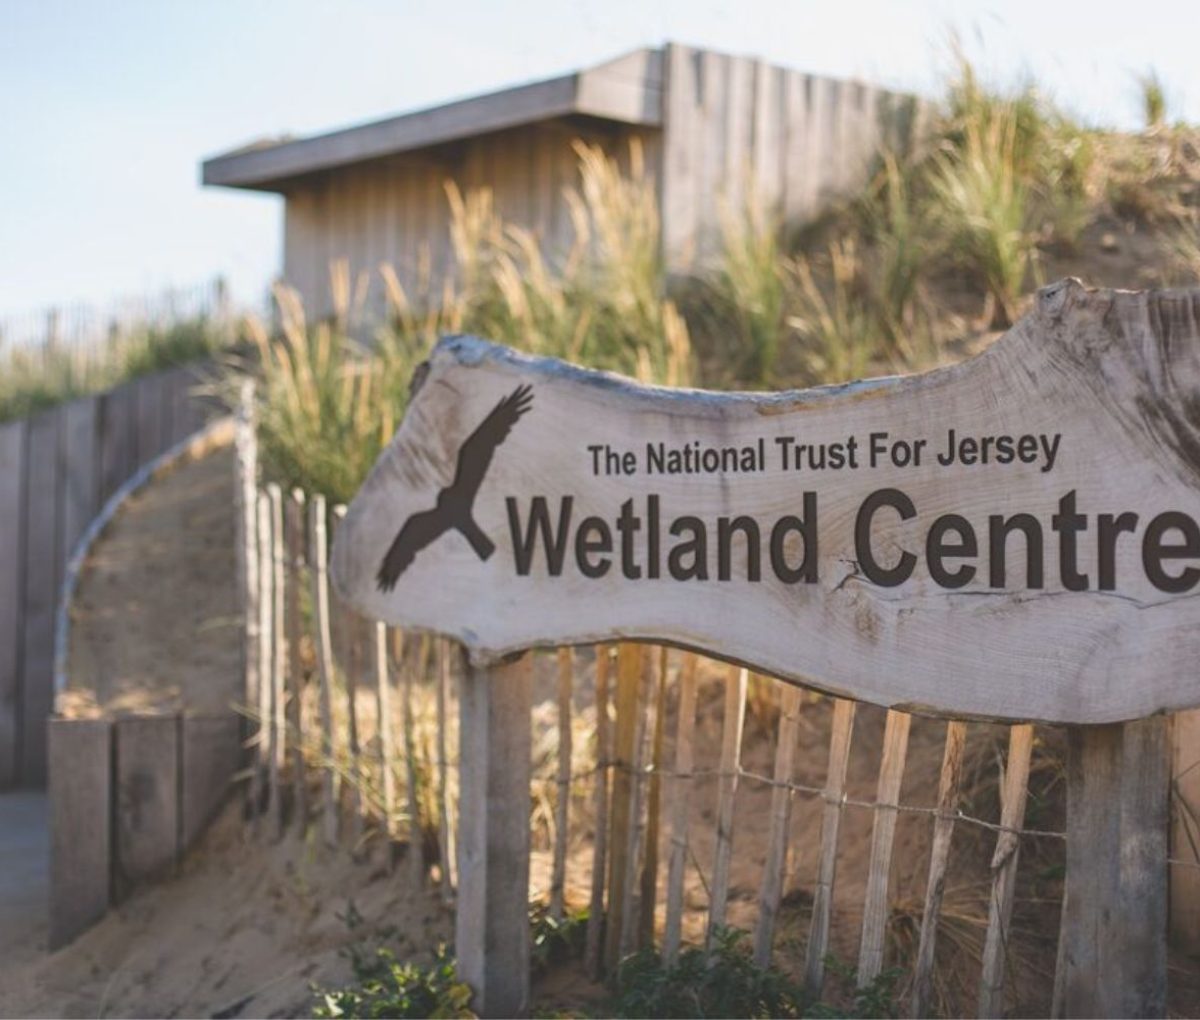 The National Trust for Jersey Wetland Centre, Jersey